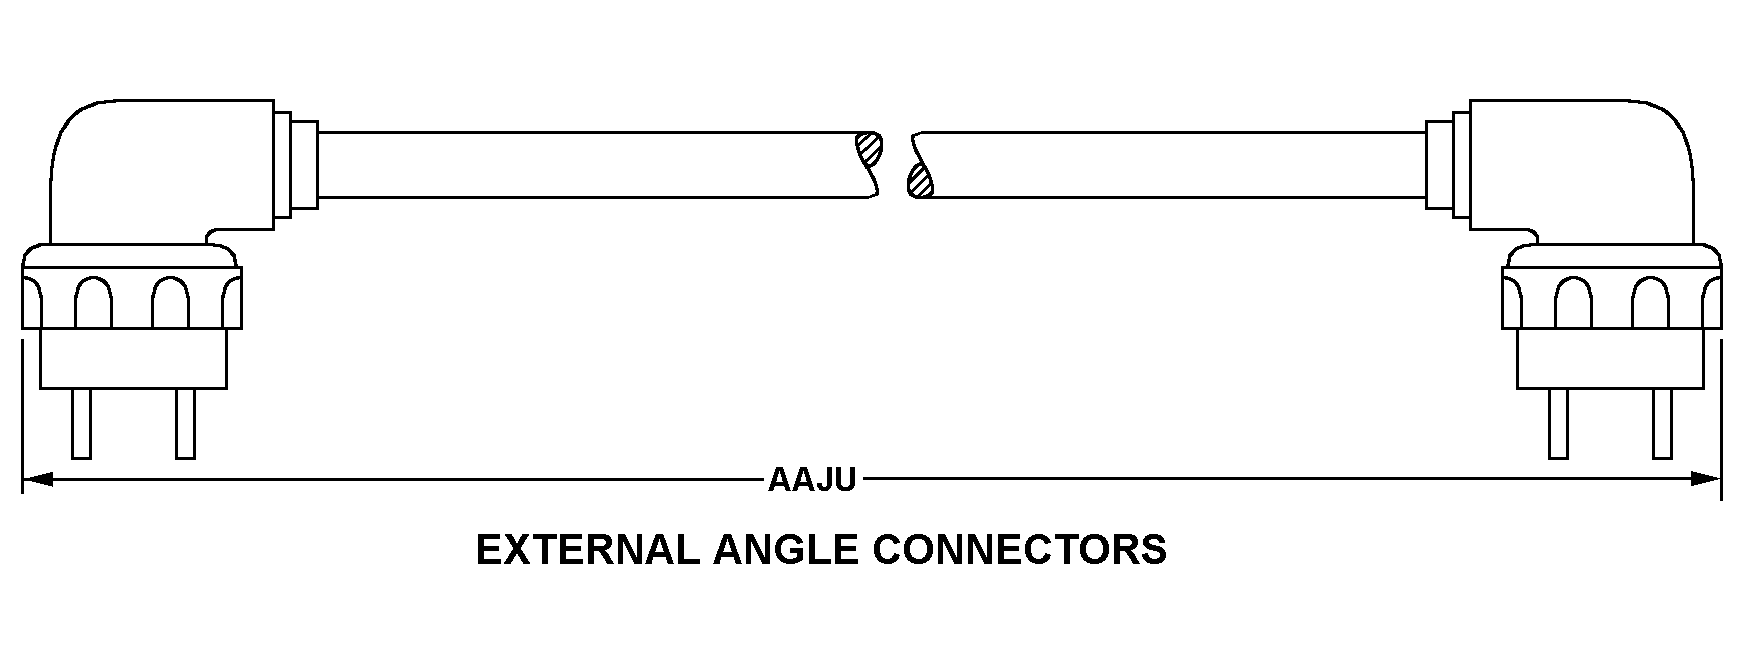 EXTERNAL ANGLE CONNECTORS style nsn 5995-01-333-6569